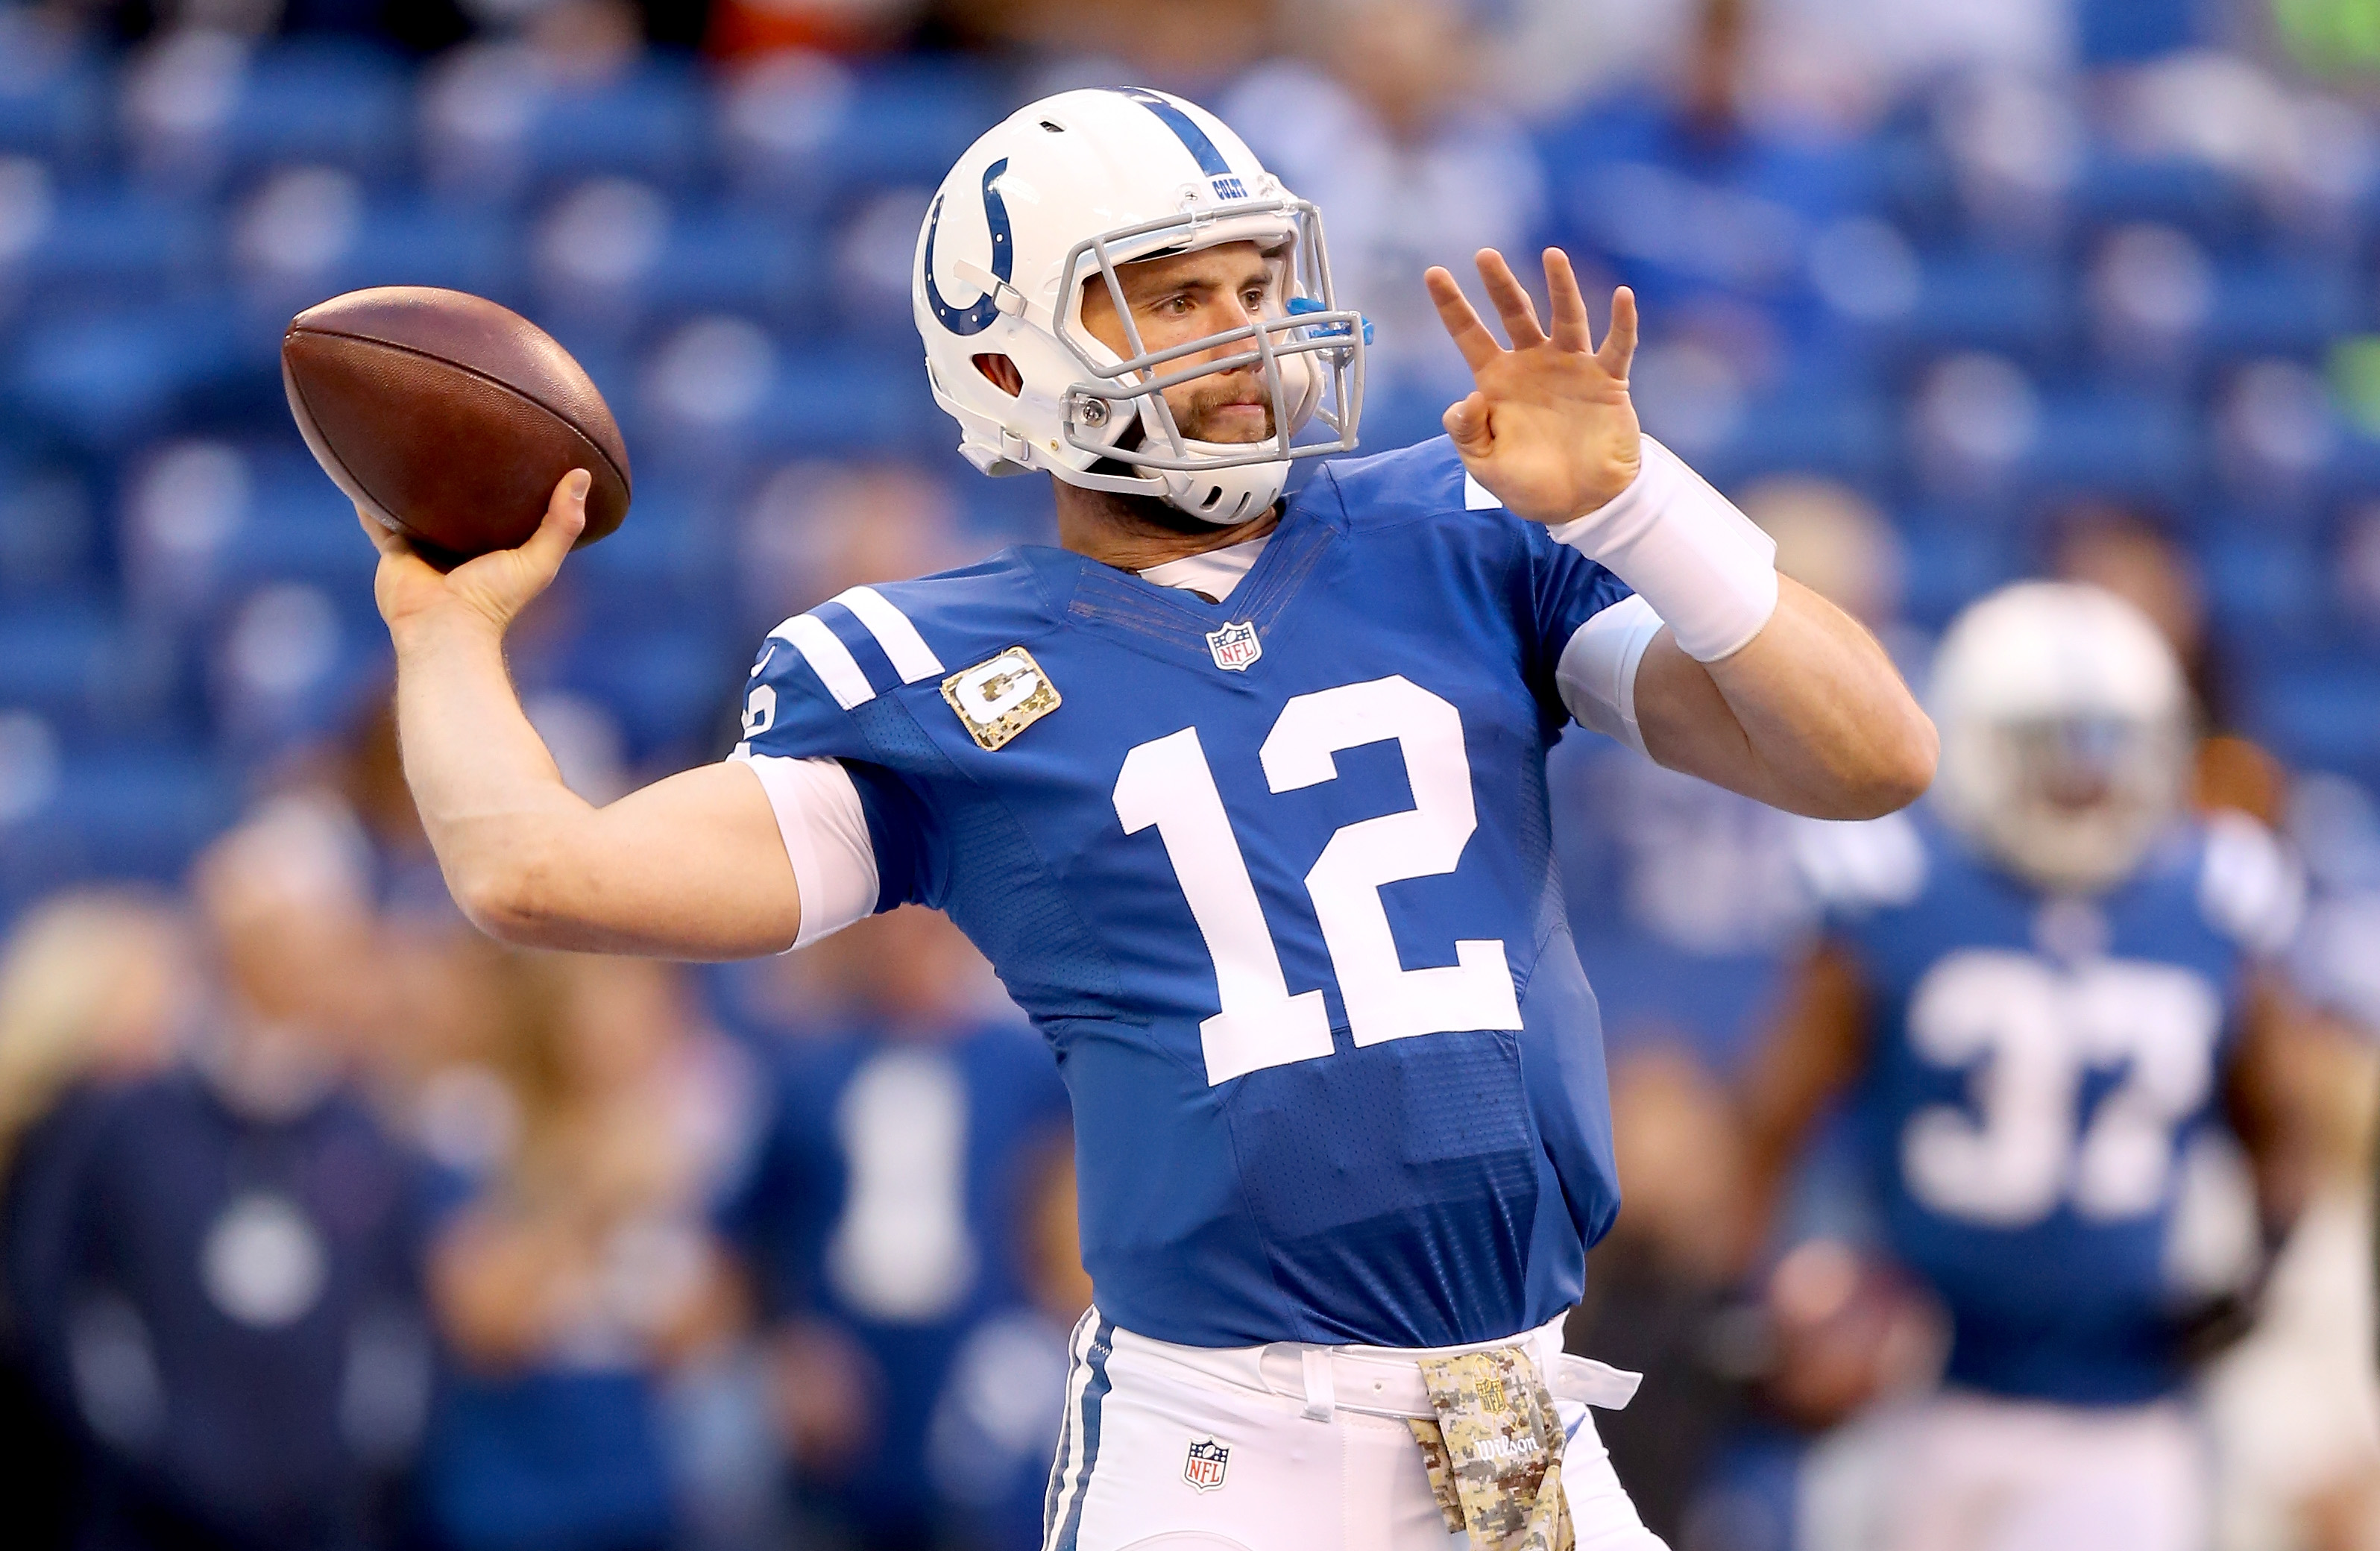 andrew luck playing, andrew luck starting, luck hof game, luck starting tonight, luck hall of fame game